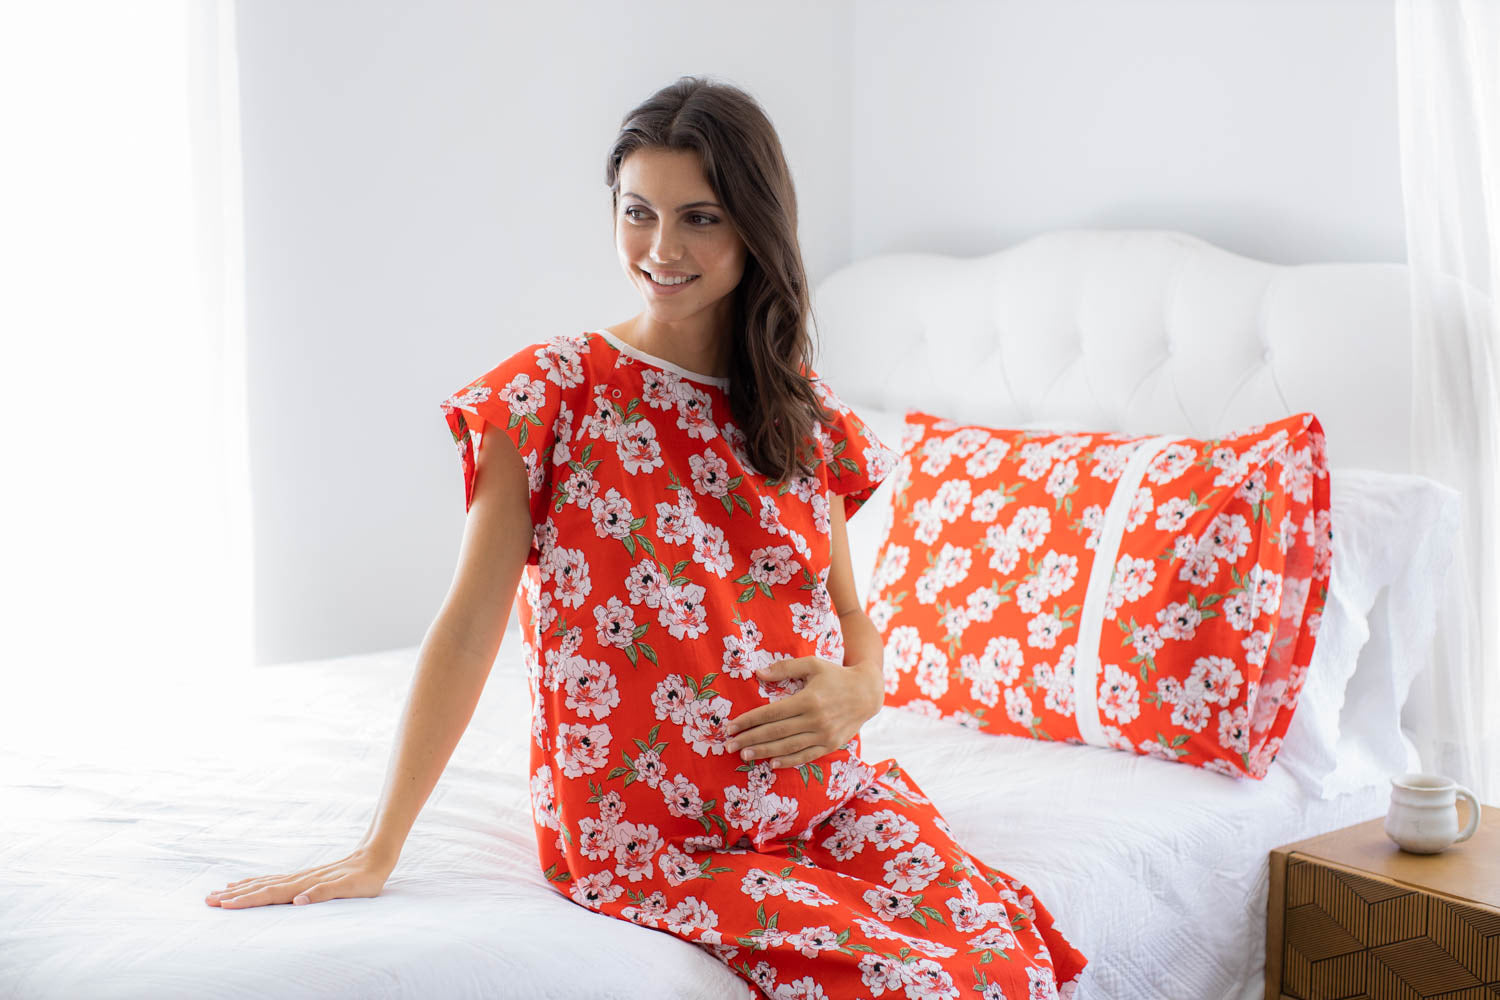 3 in 1 Labor Gowns – Gownies™